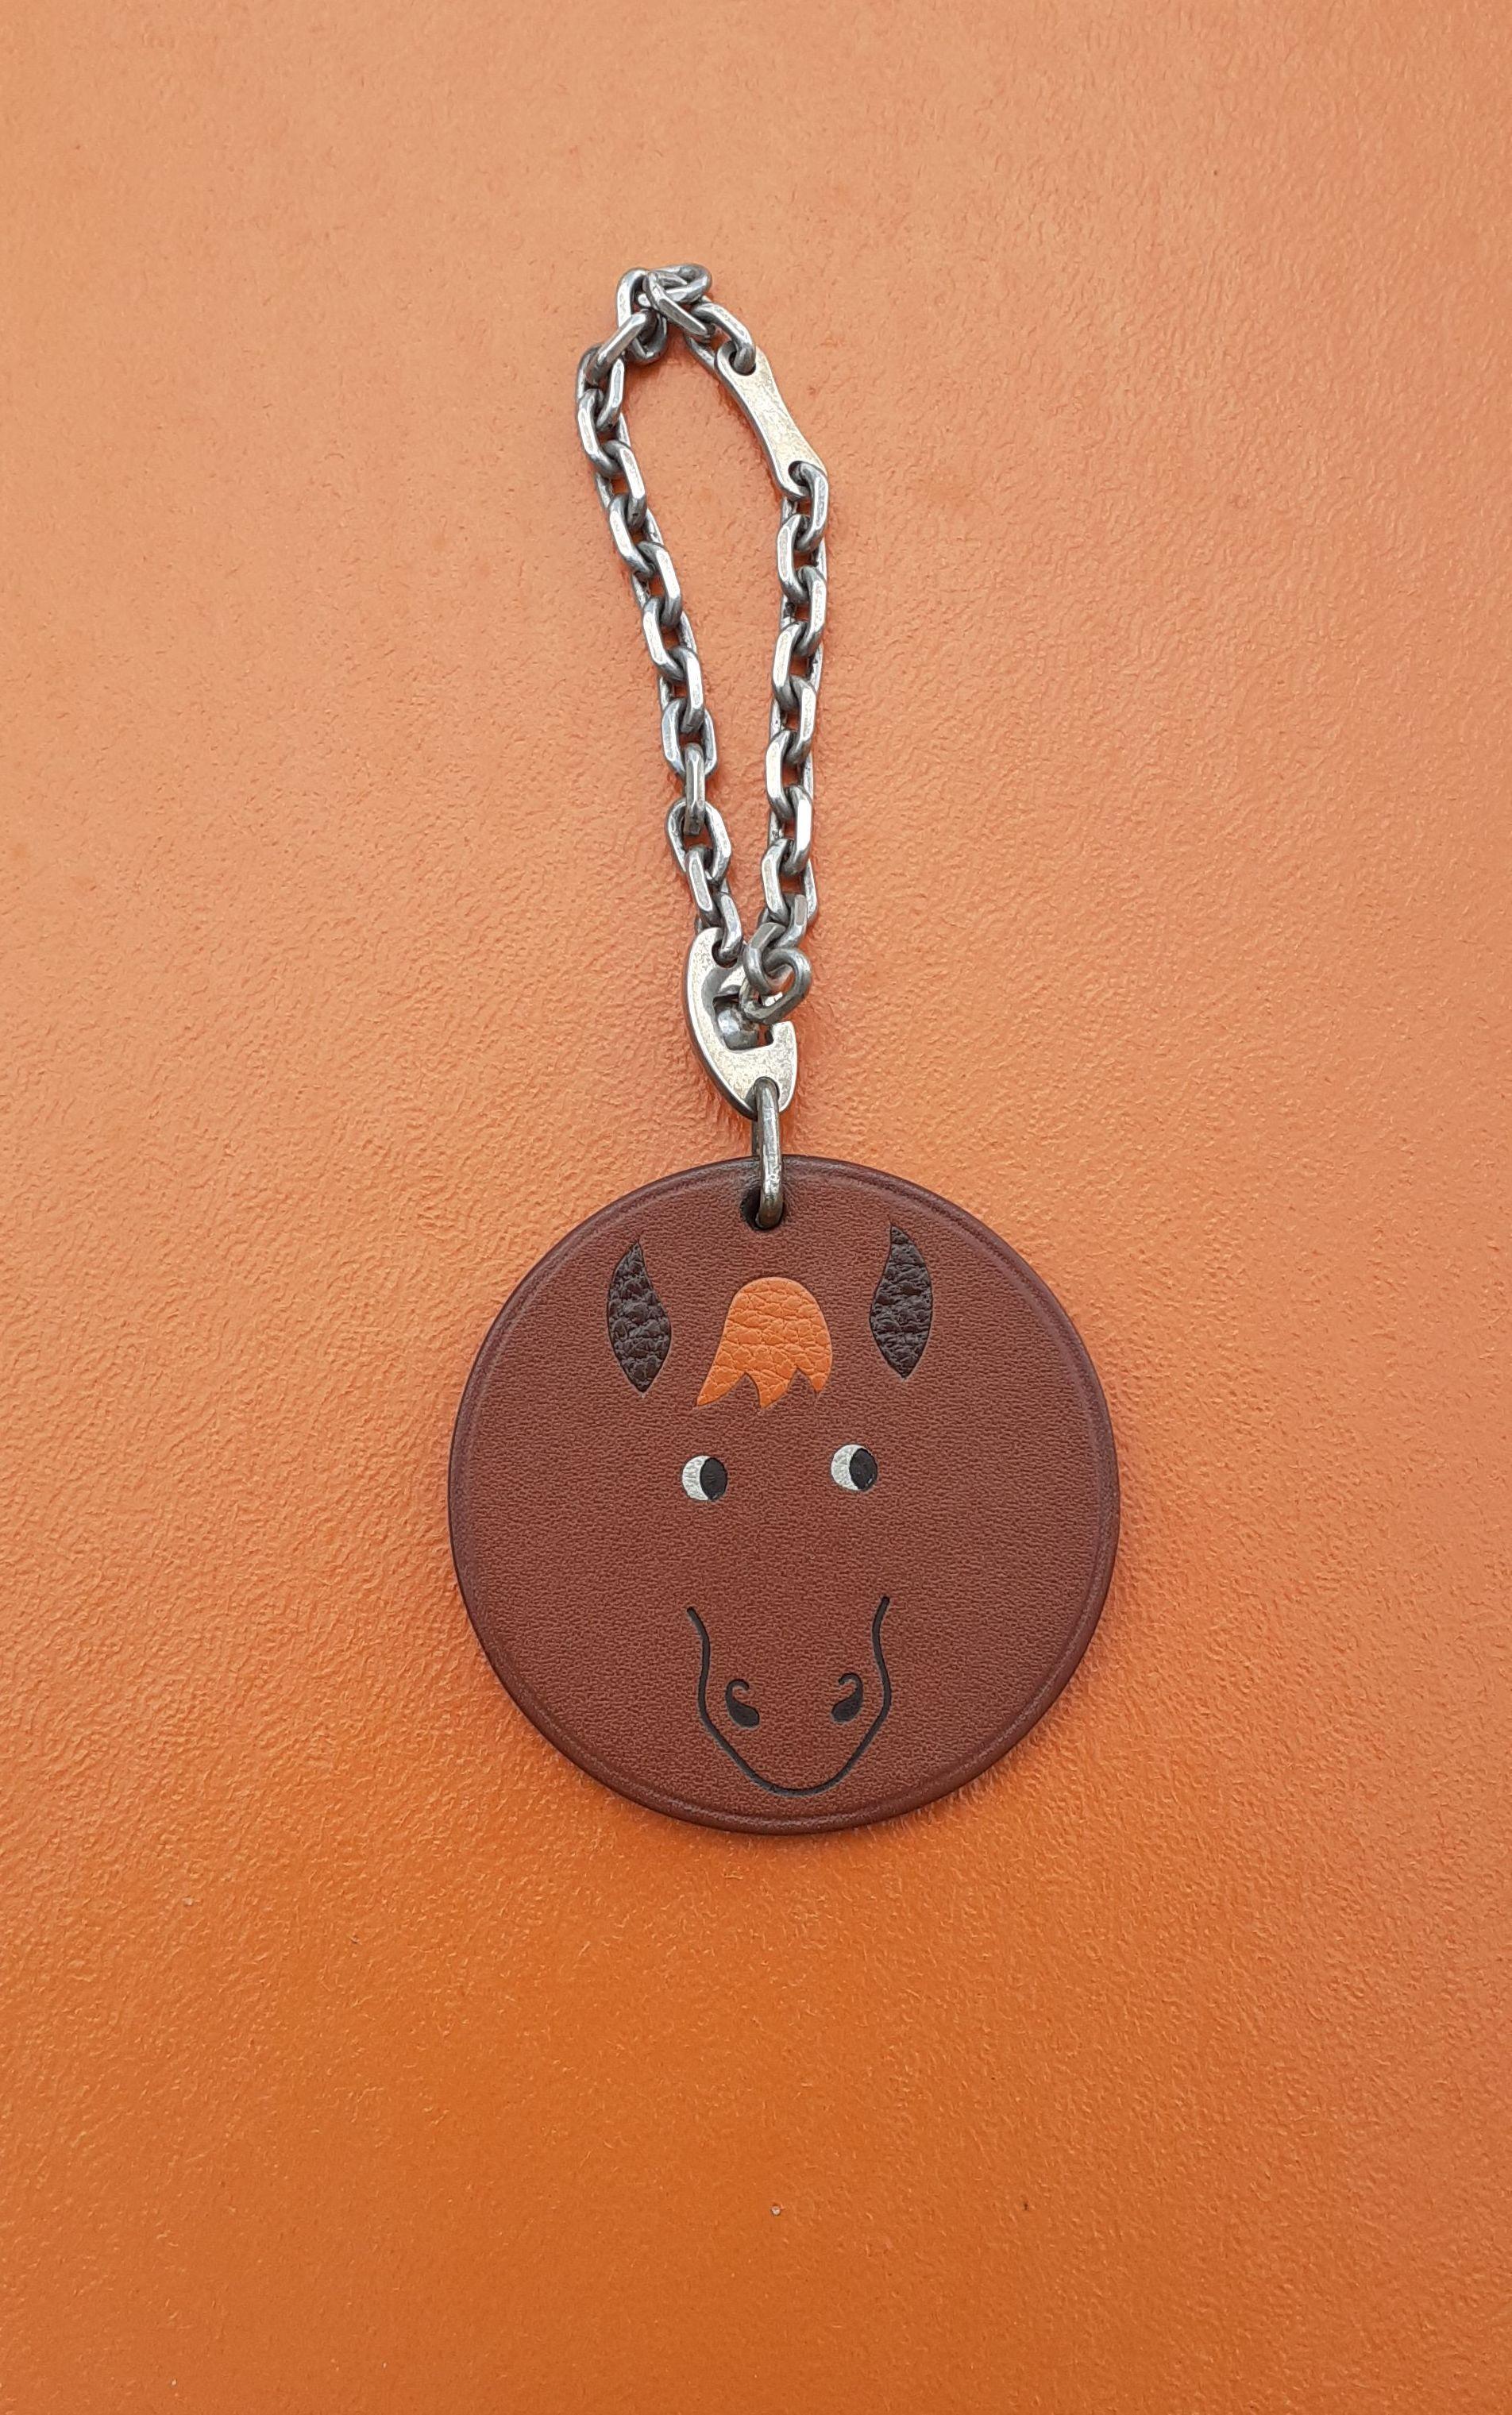 Super Cute Authentic Hermès Key Holder

Can be used as charm for your Kelly, Birkin or any other Hermès bag

Round in shape, printed with a cute horse's head

Made of barenia smooth leather and sterling silver chain / Ears and mane made of grained